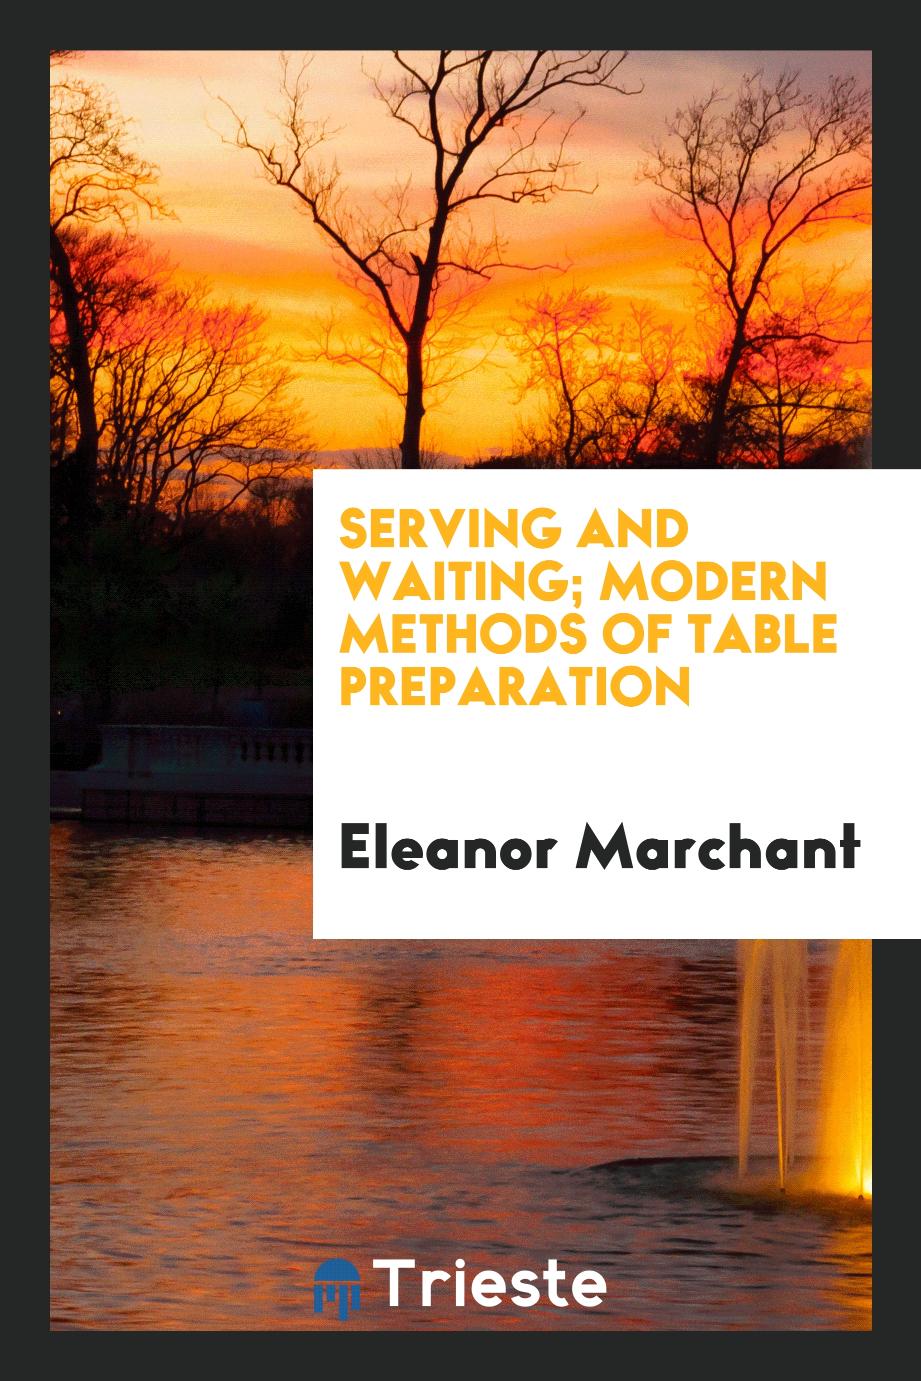 Serving and waiting; modern methods of table preparation